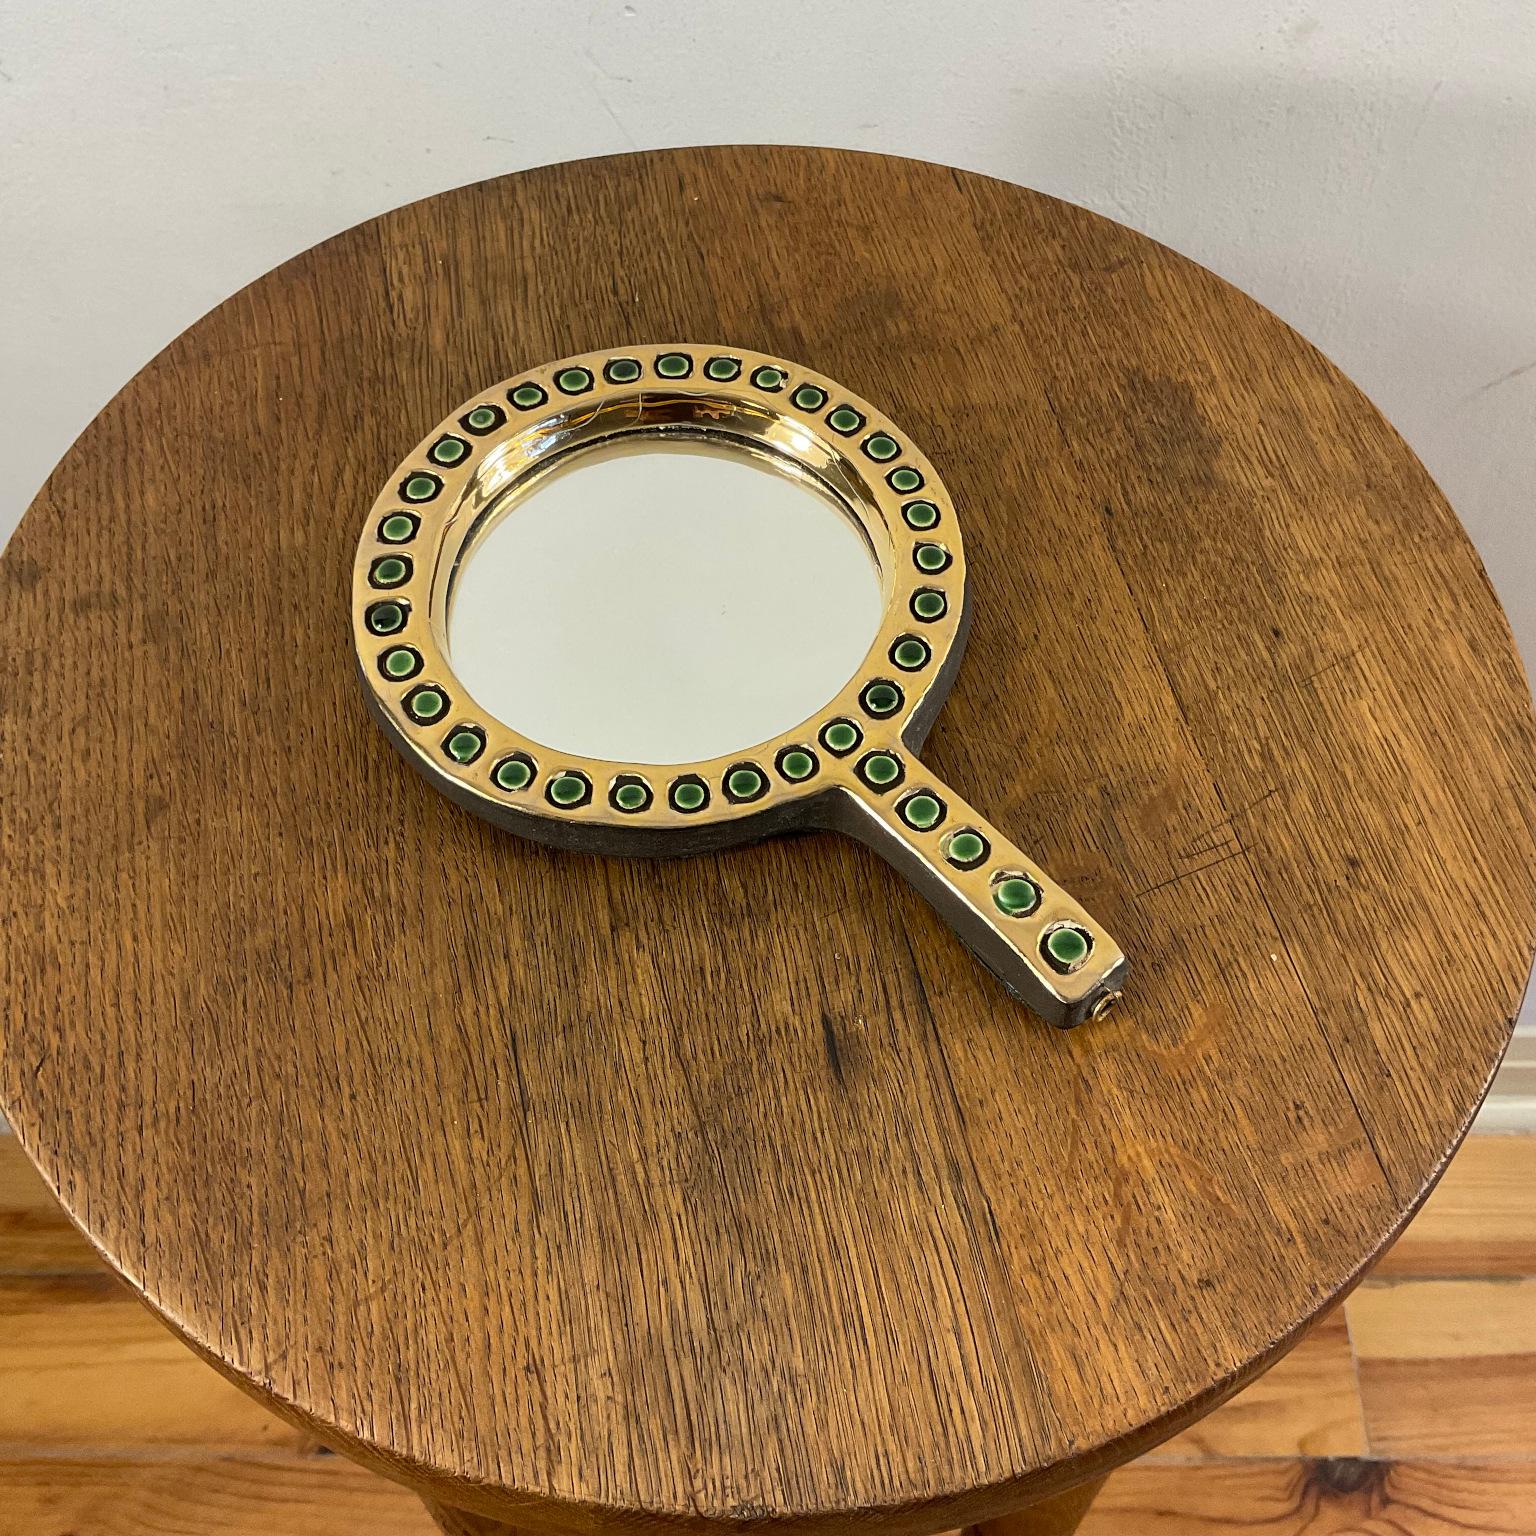 Rare hand-faced mirror designed by one of the greatest French ceramists Mithé Espelt (1923-2020) “Quadrille” model circa 1952.
Gold enameled terracotta with cracked green cabochons. Back covered with green felt.
Similar model ( with blue enamel